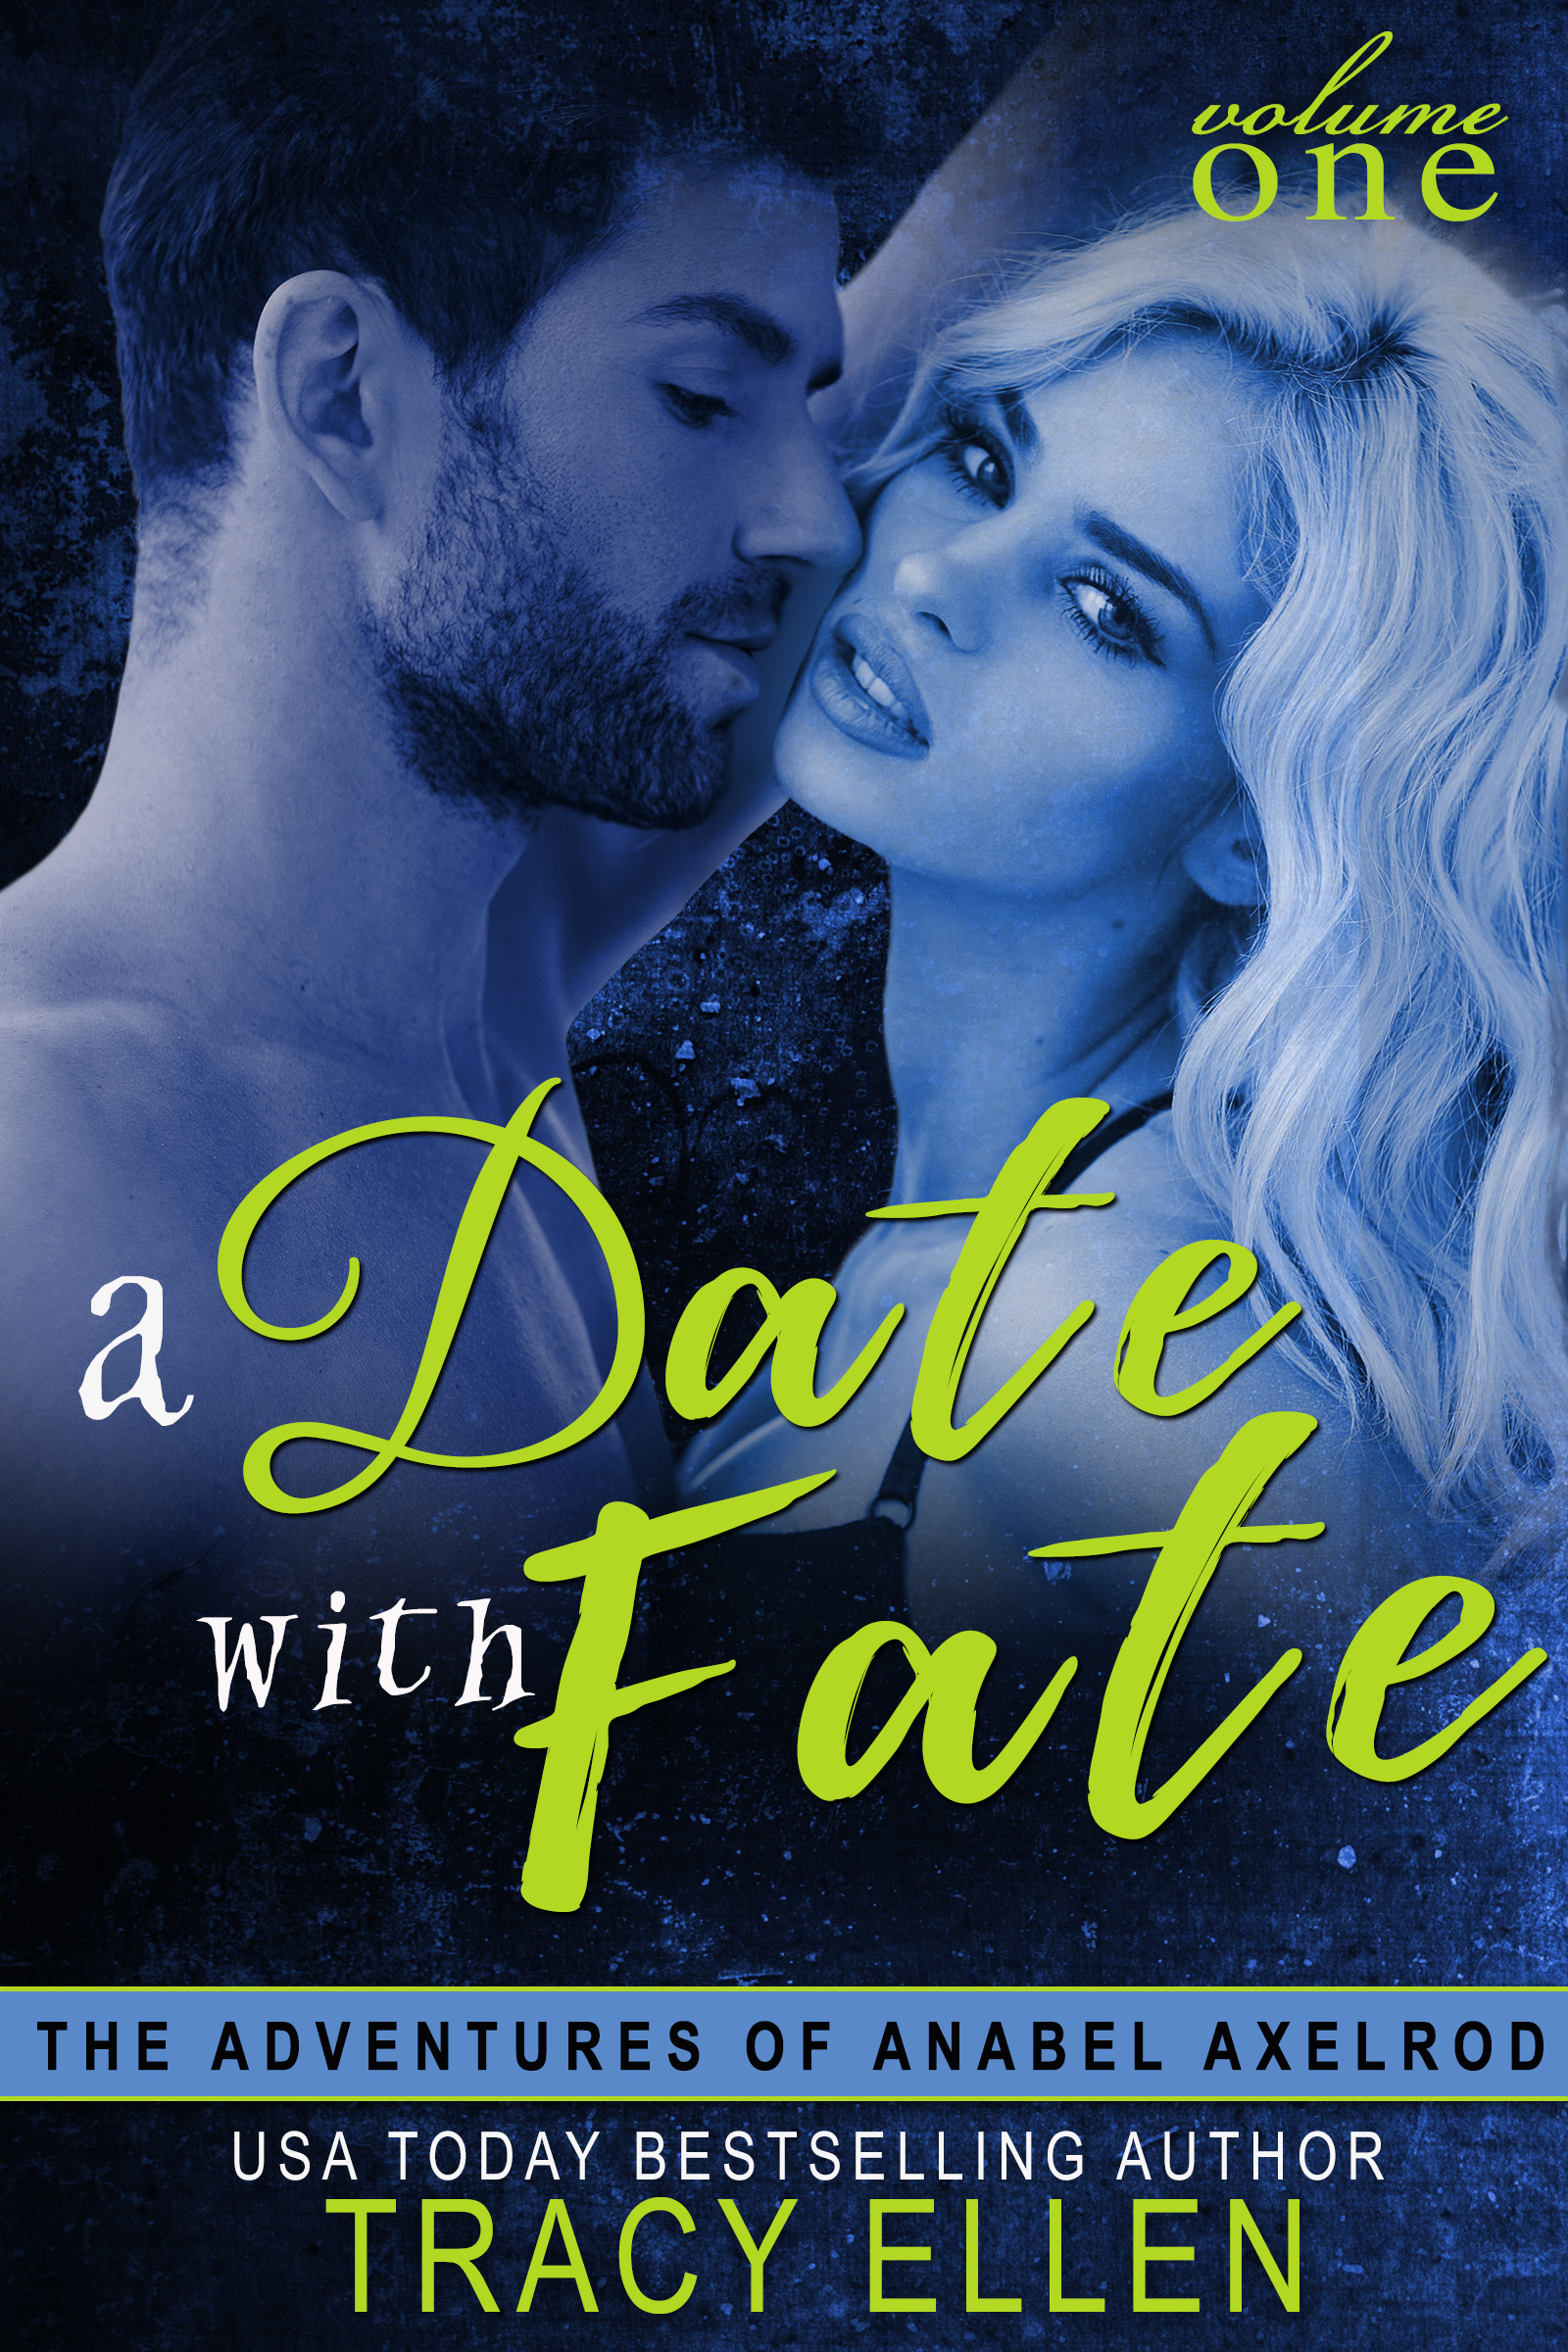 FREE: A Date with Fate (The Adventures of Anabel Axelrod, Book 1 by Tracy Ellen